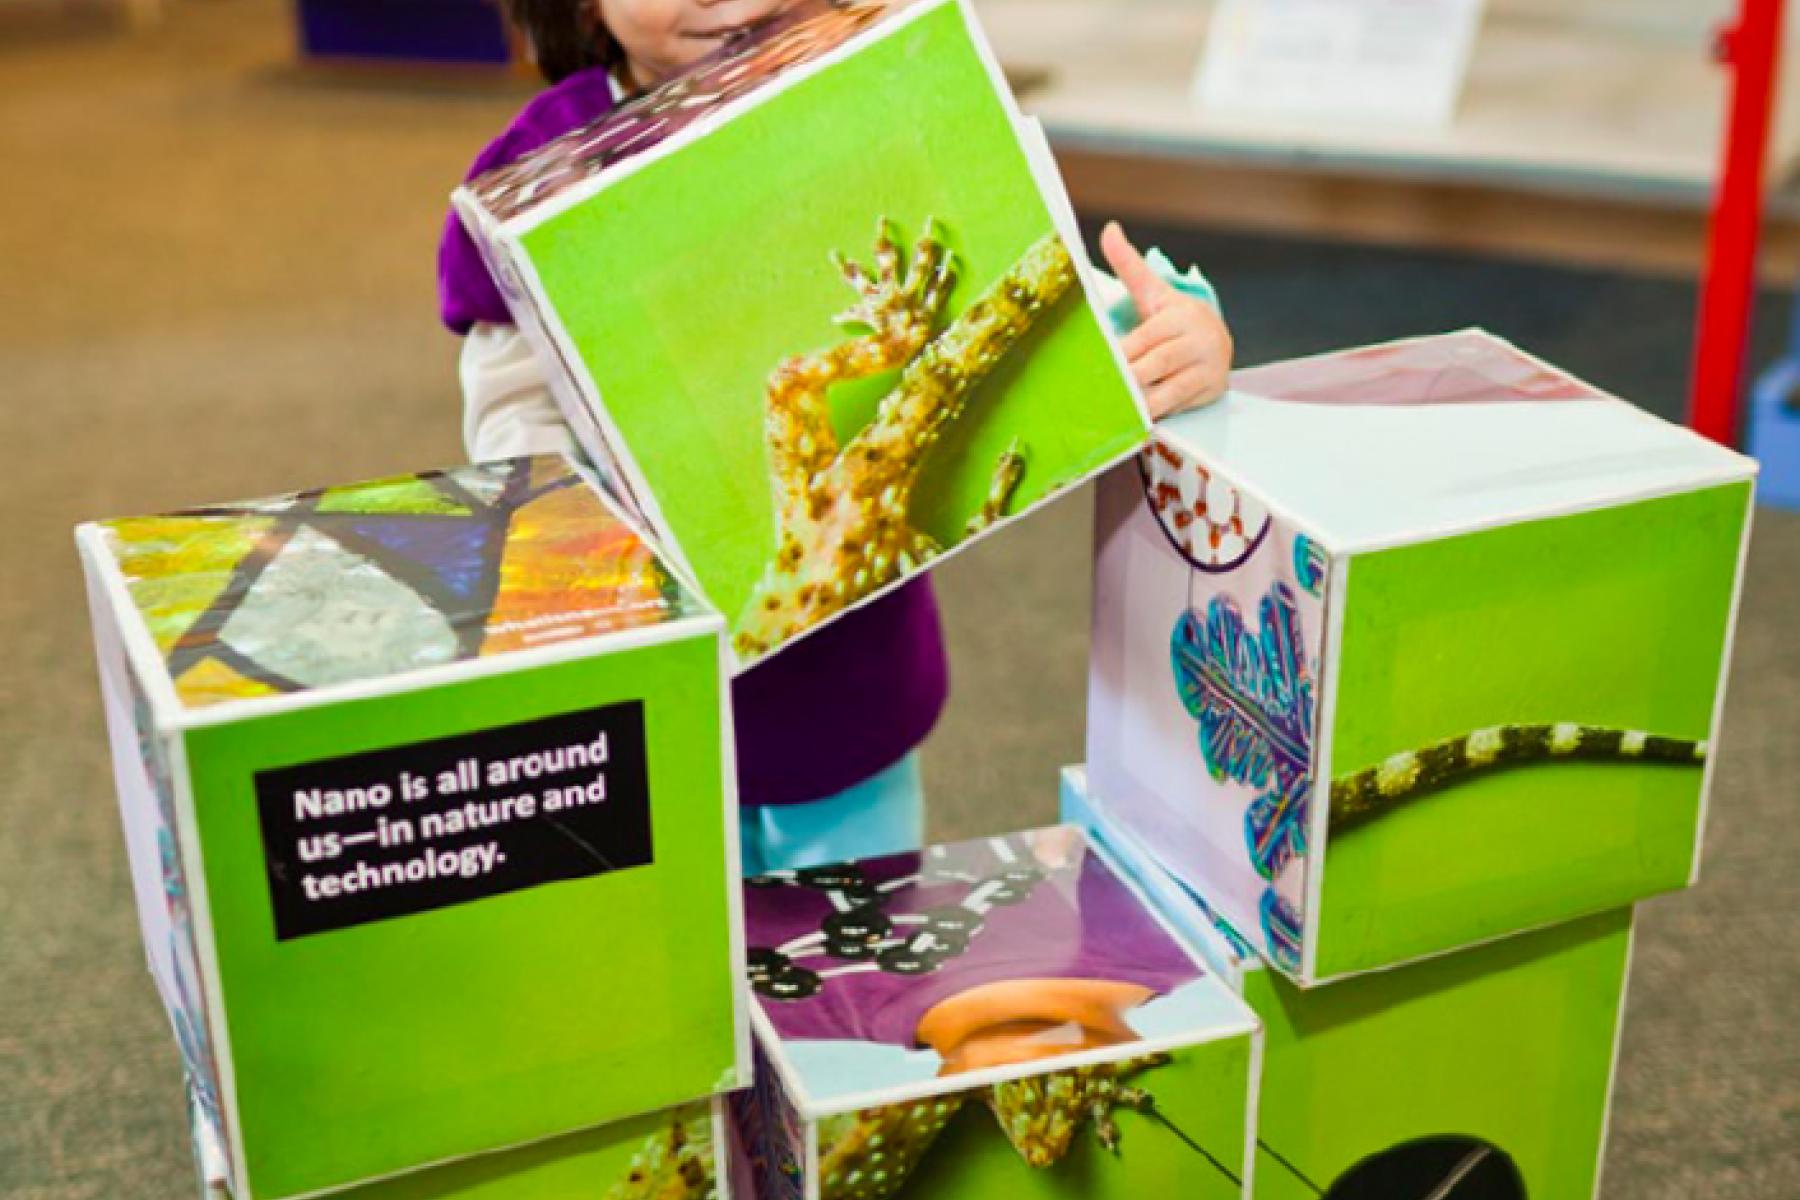 Young girl stacks large blocks with images on them